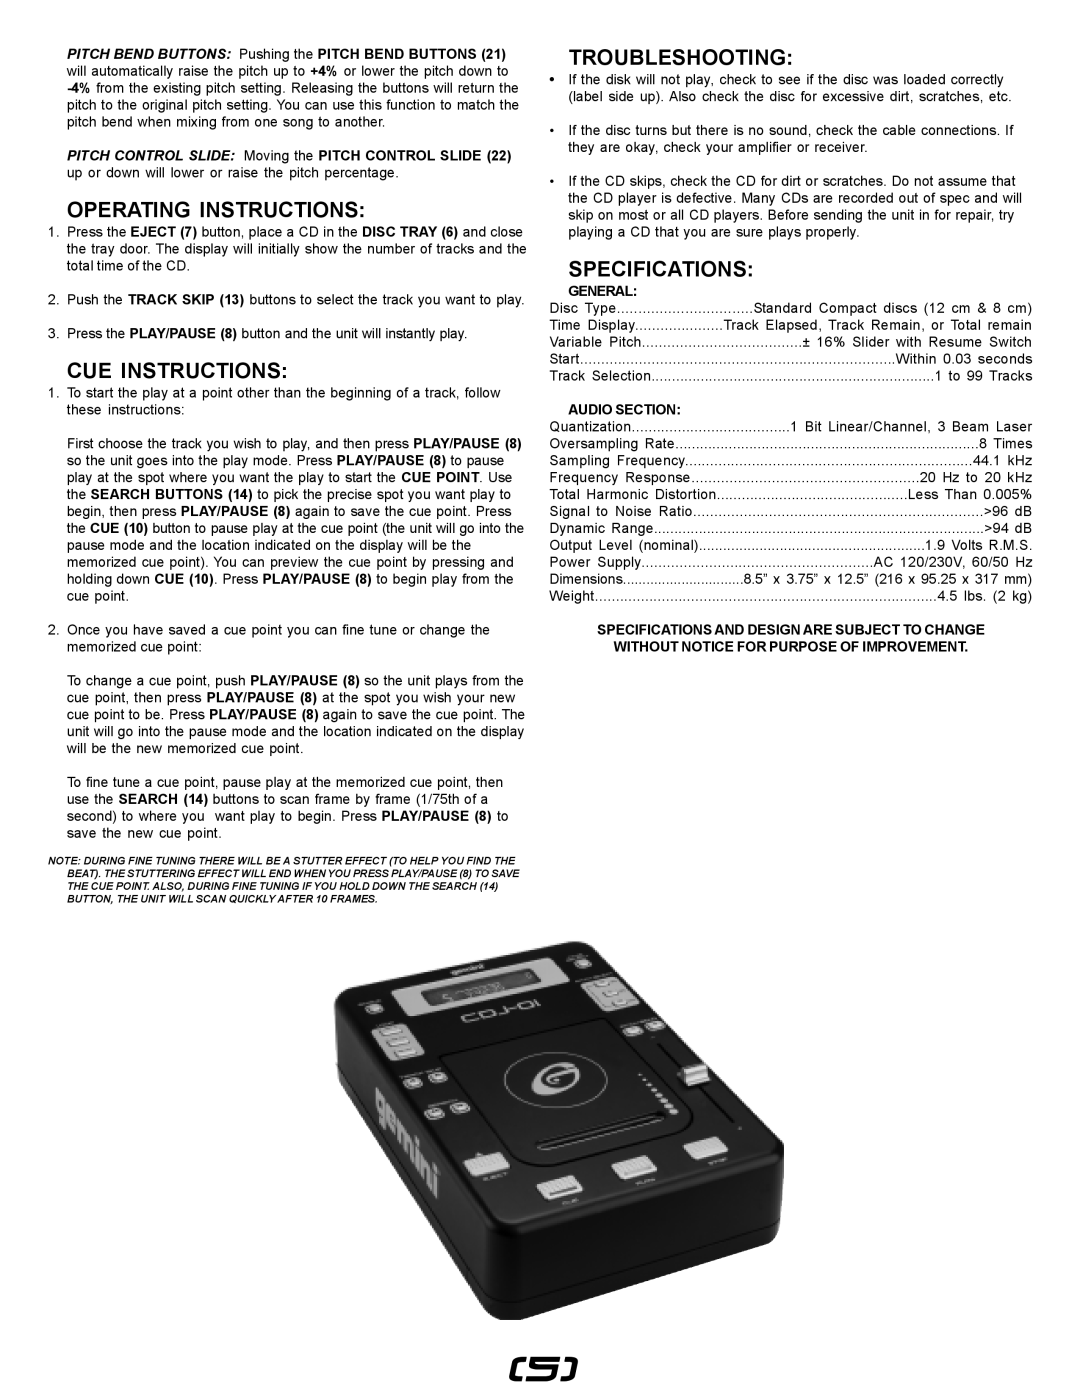 Gemini CDJ-0I manual Operating Instructions, Cue Instructions, Troubleshooting, Specifications, General, Audio Section 